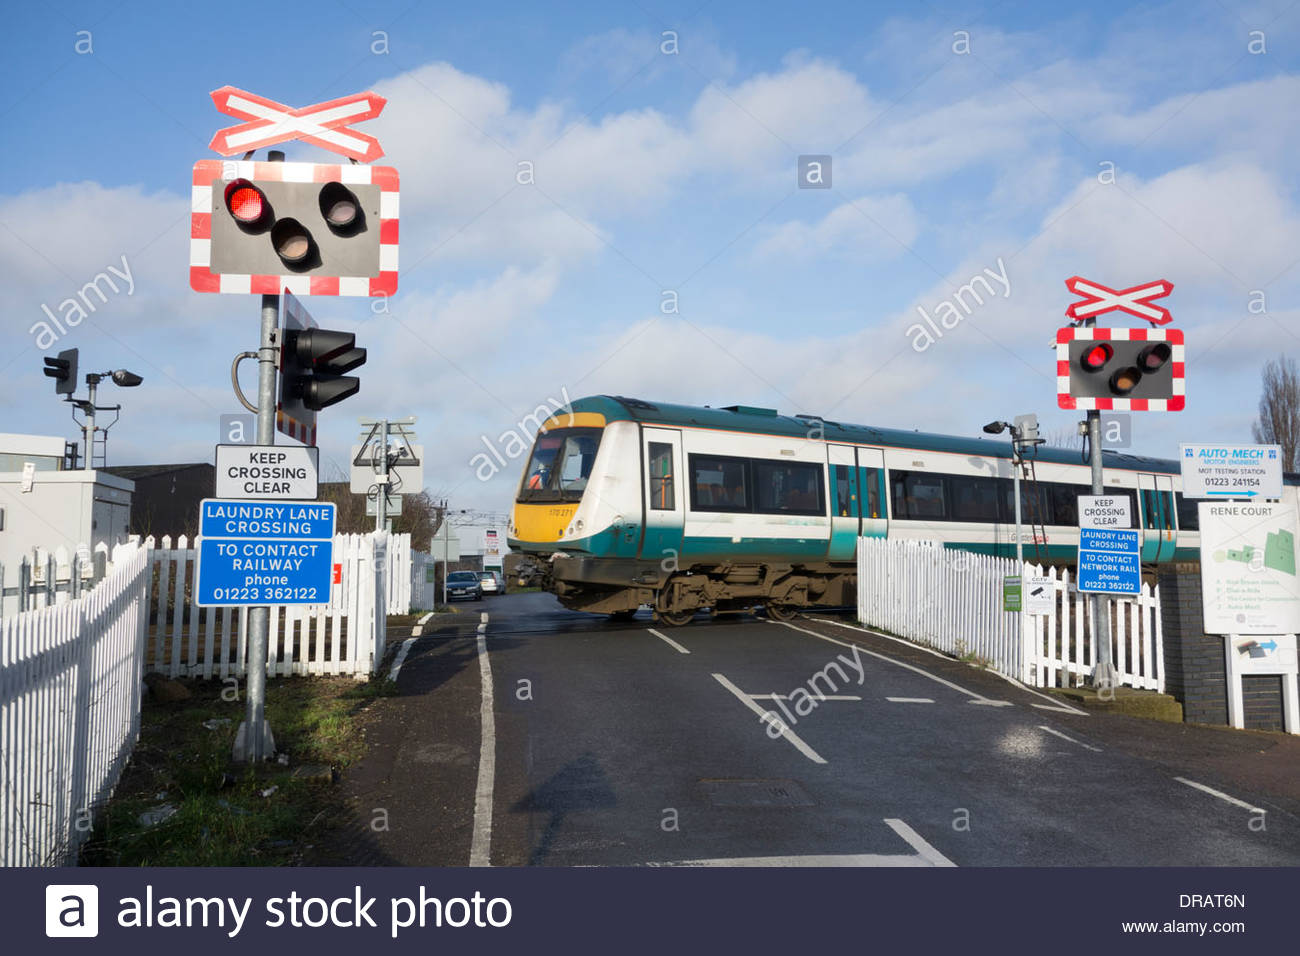 Ungated And Unmanned Level Crossing With Signals And Train Crossing In Cambridge England Uk Stock Photo Alamy